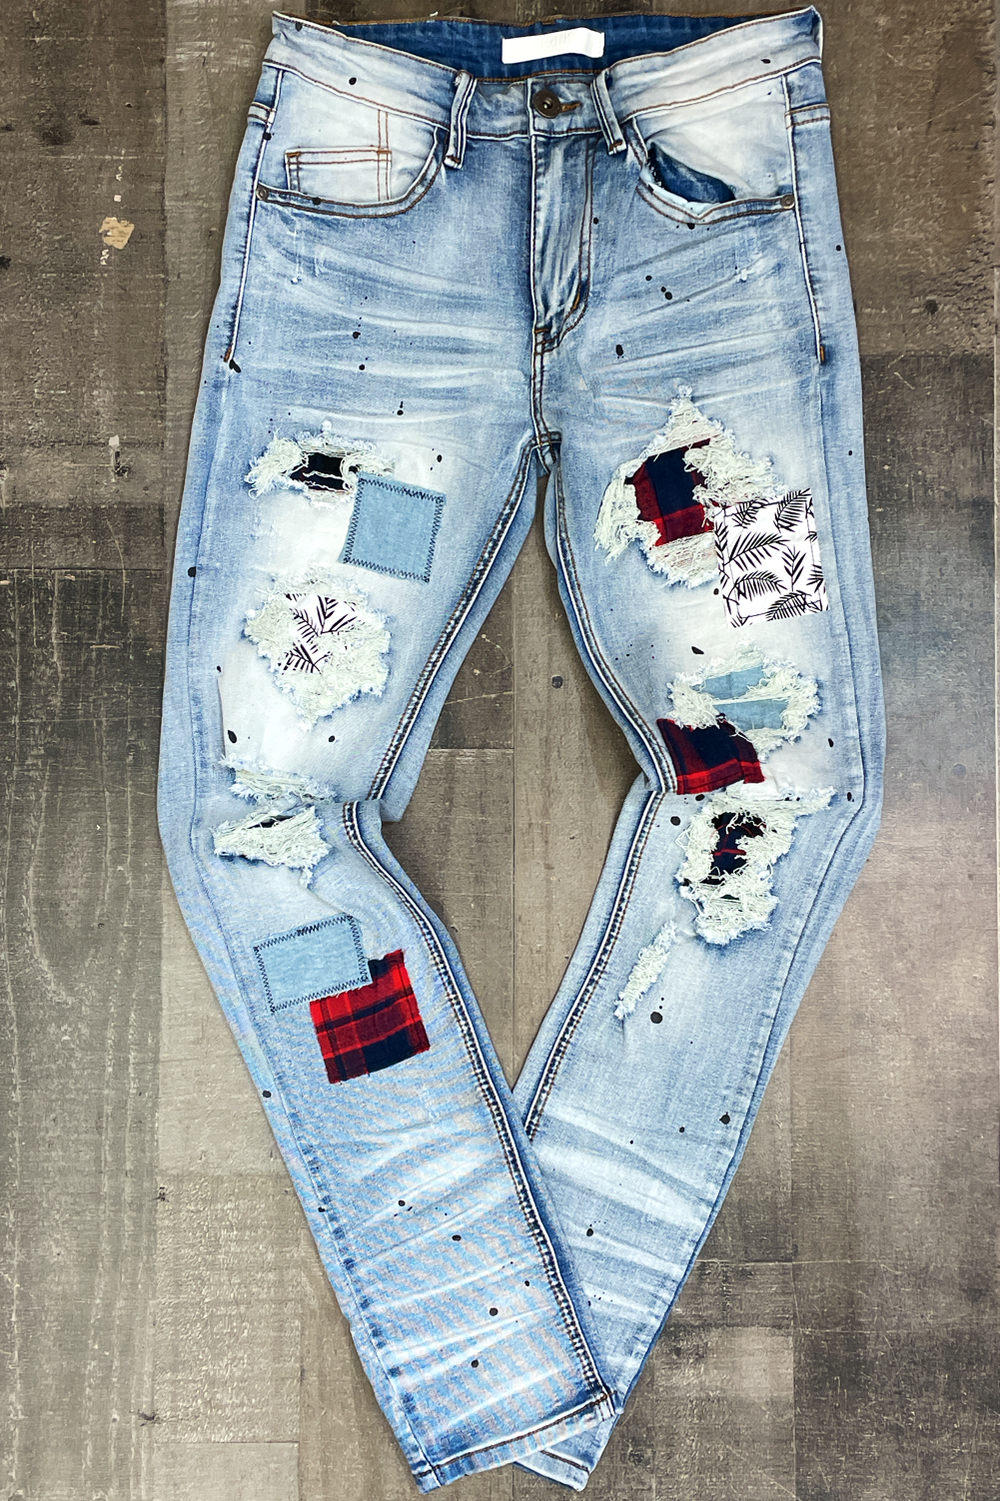 KDNK- multi patched jeans